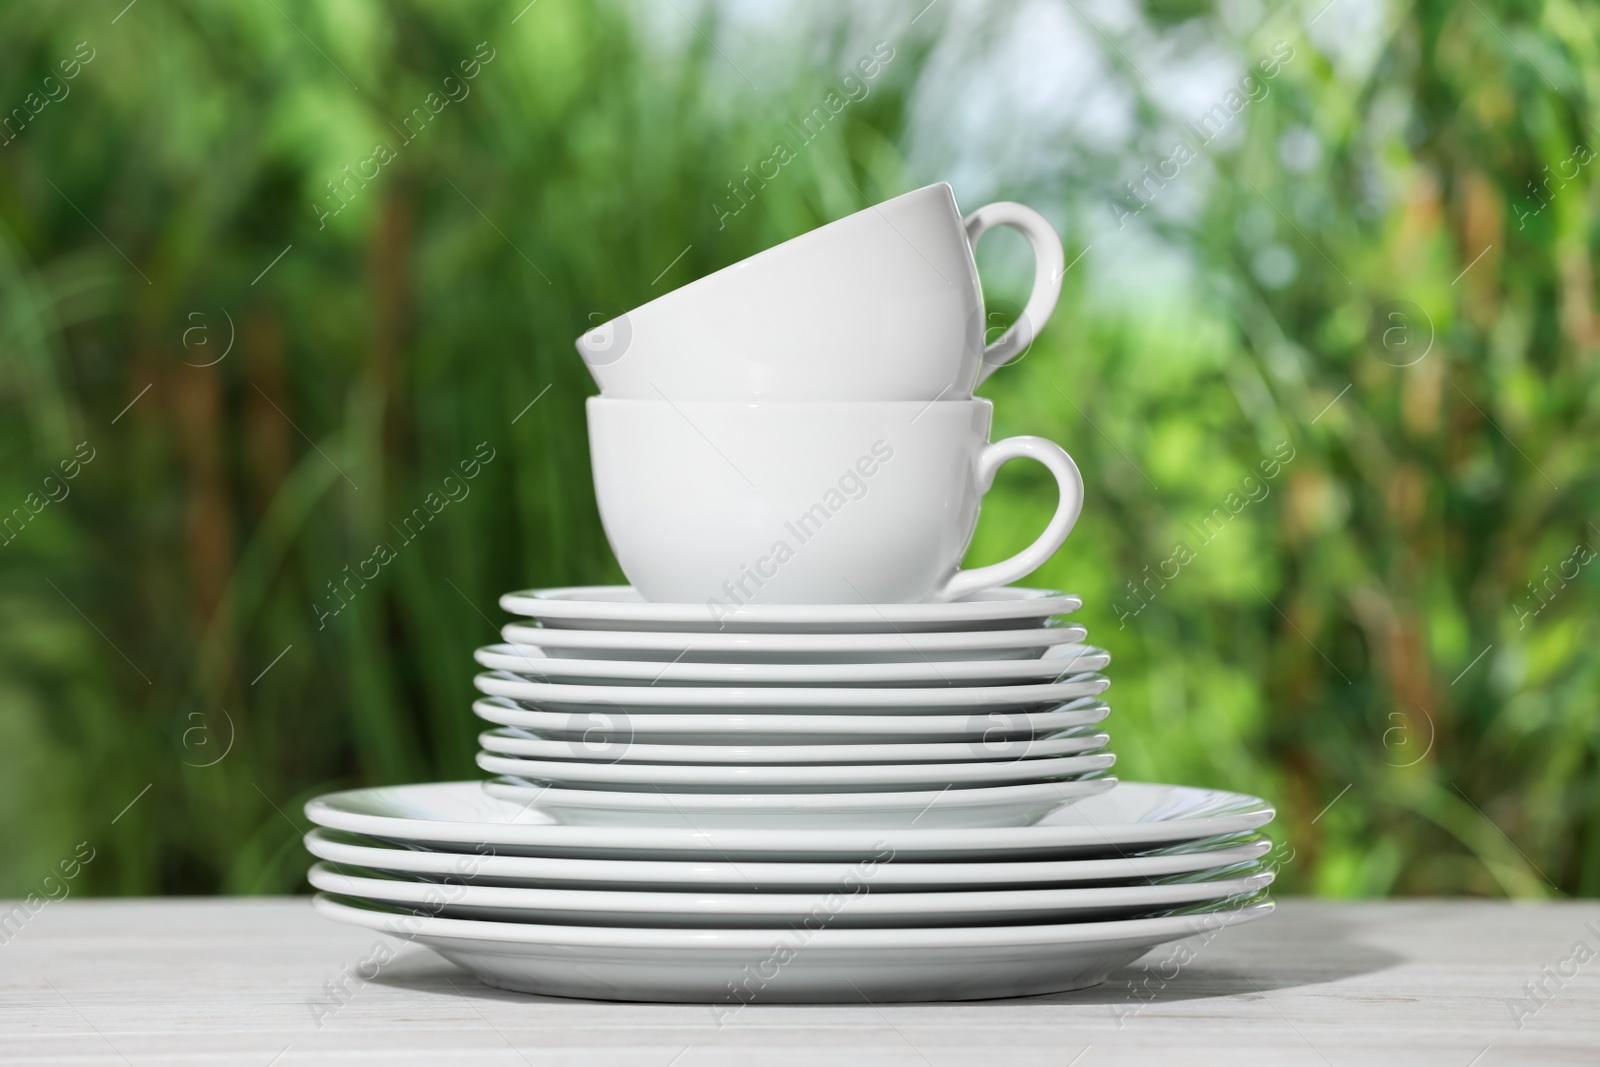 Photo of Set of clean plates and cups on white table against blurred background